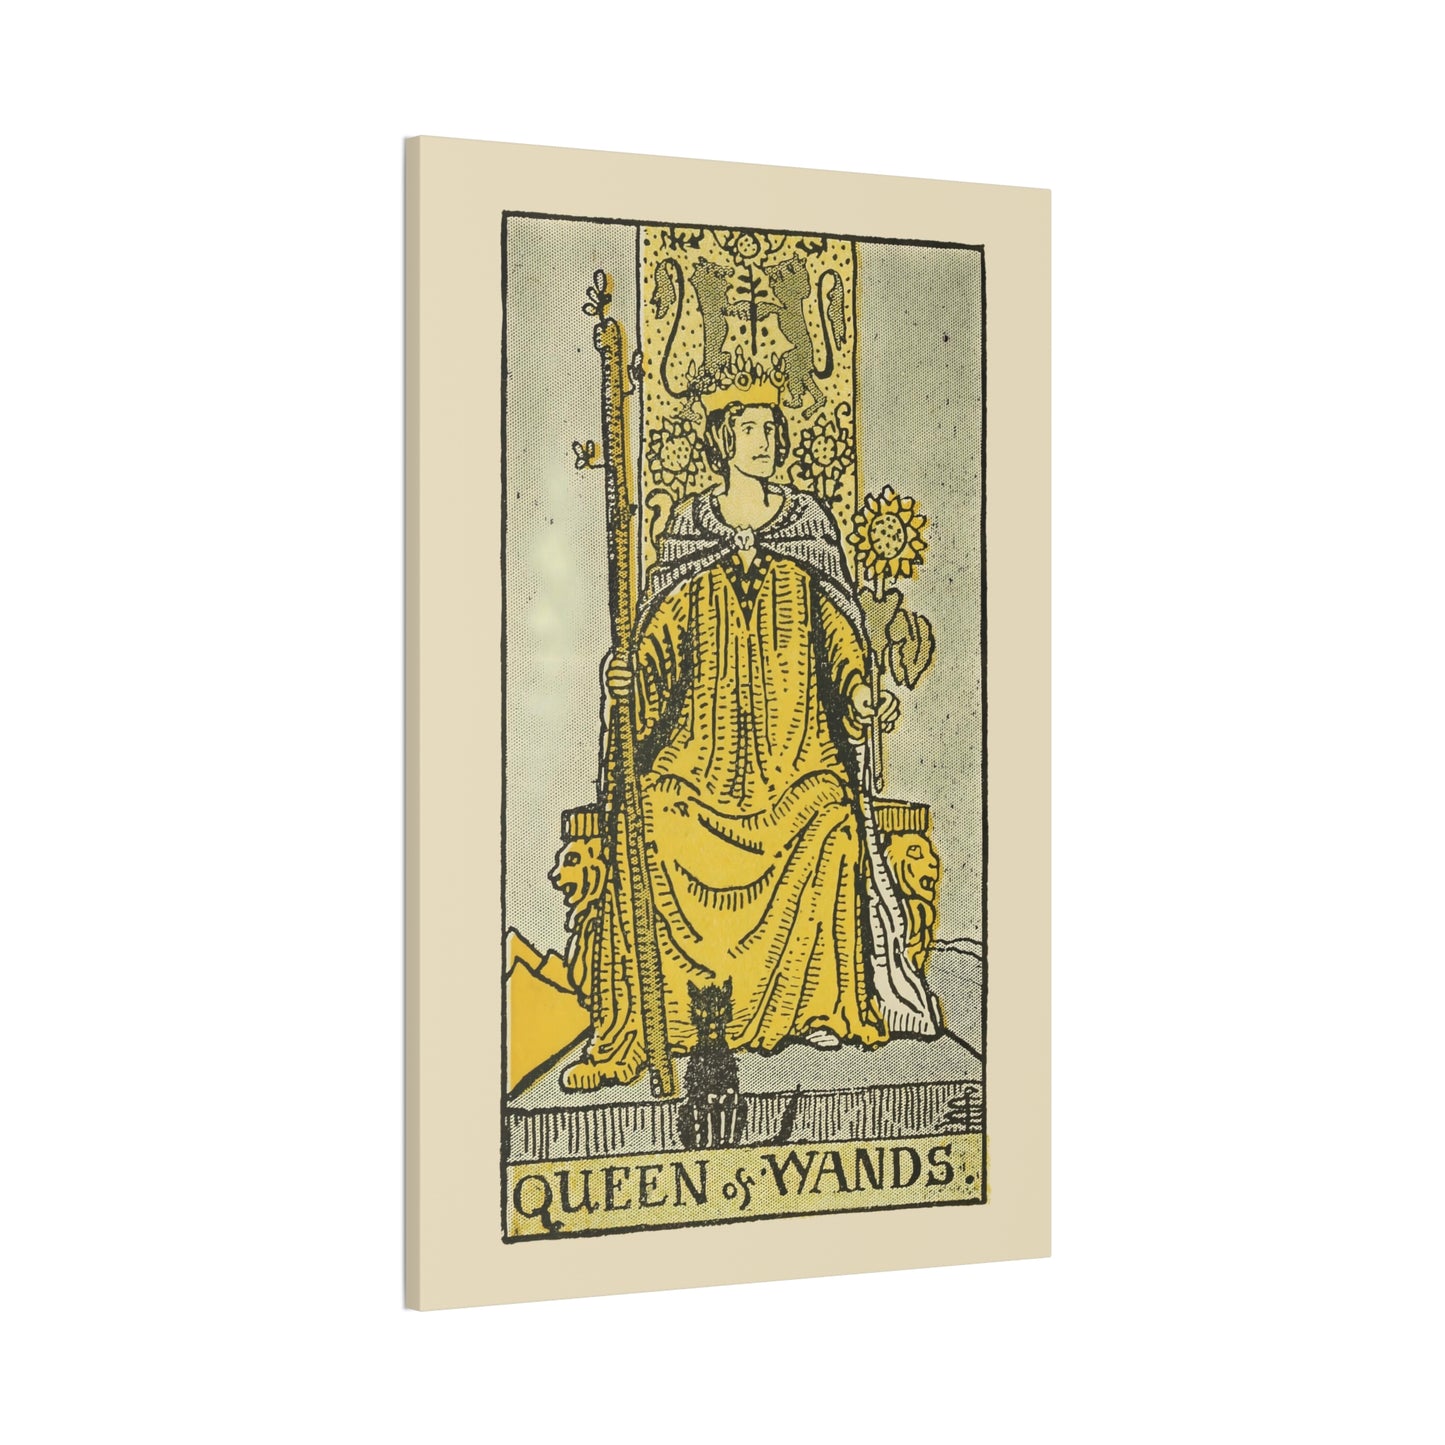 Queen Of Wands Canvas Print - Tarot Card Art for Home or Office - Apothecary Decor